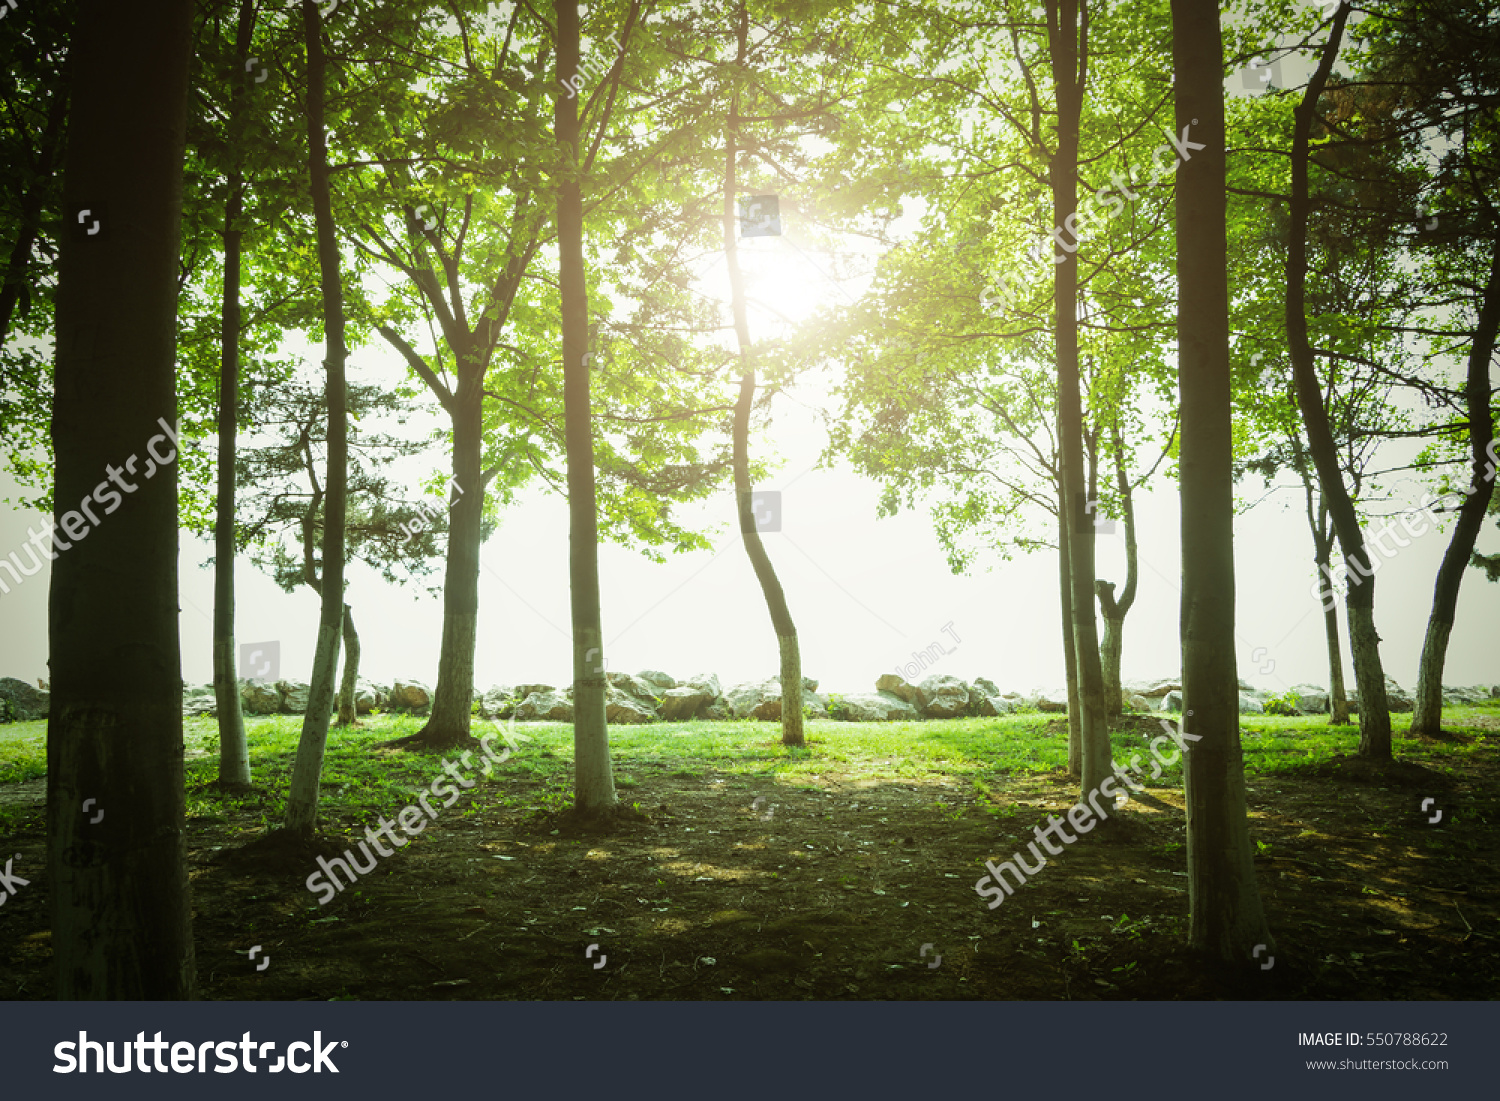 Picture of trees.